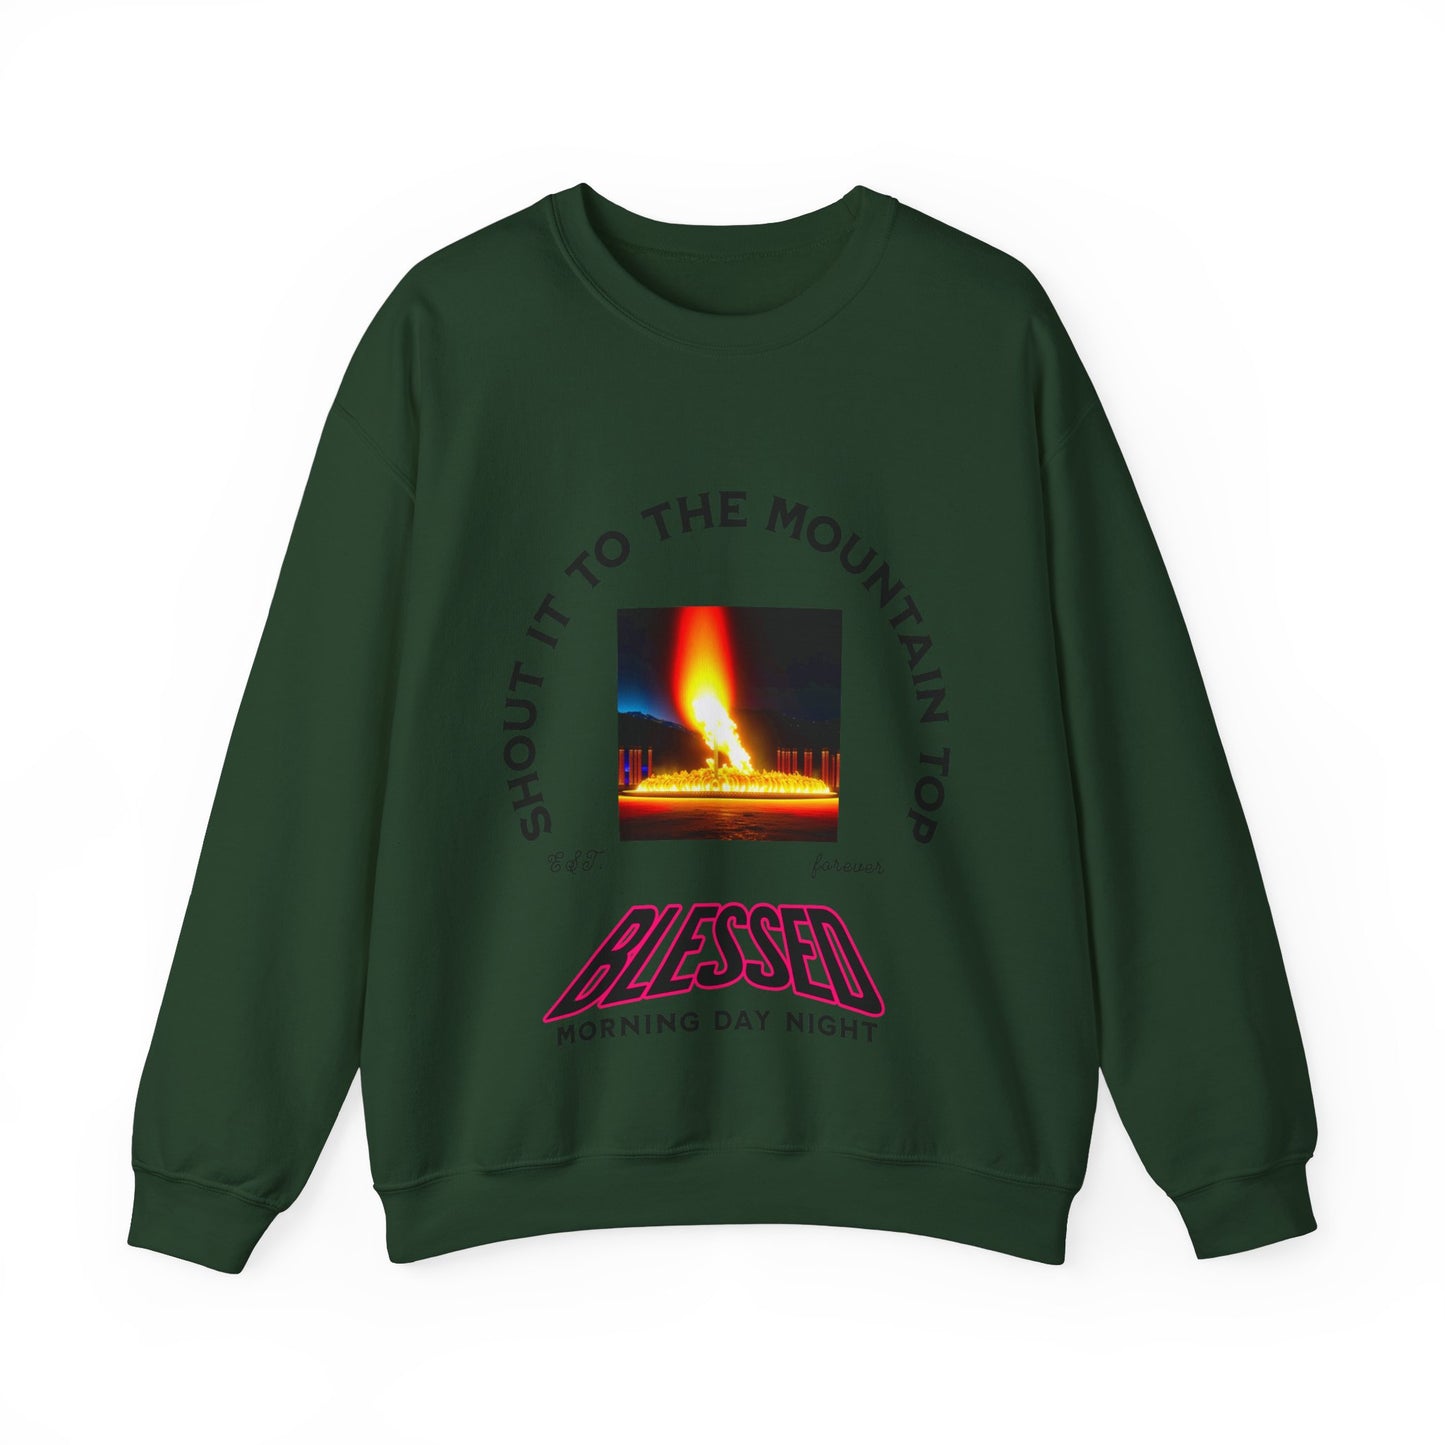 Shout It To The Mountain Top Blessed Unisex Heavy Blend™ Crewneck Sweatshirt